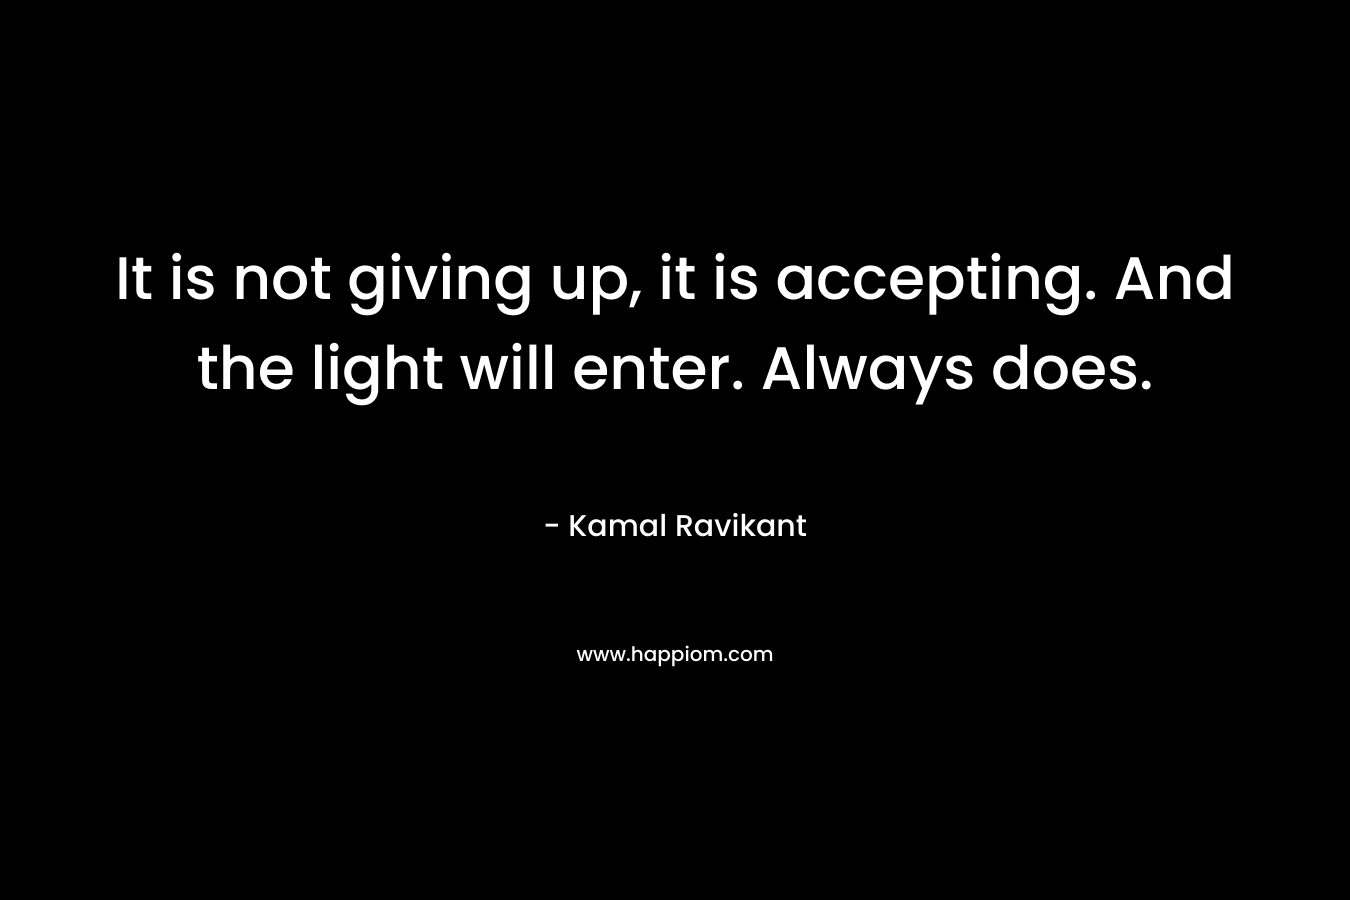 It is not giving up, it is accepting. And the light will enter. Always does.